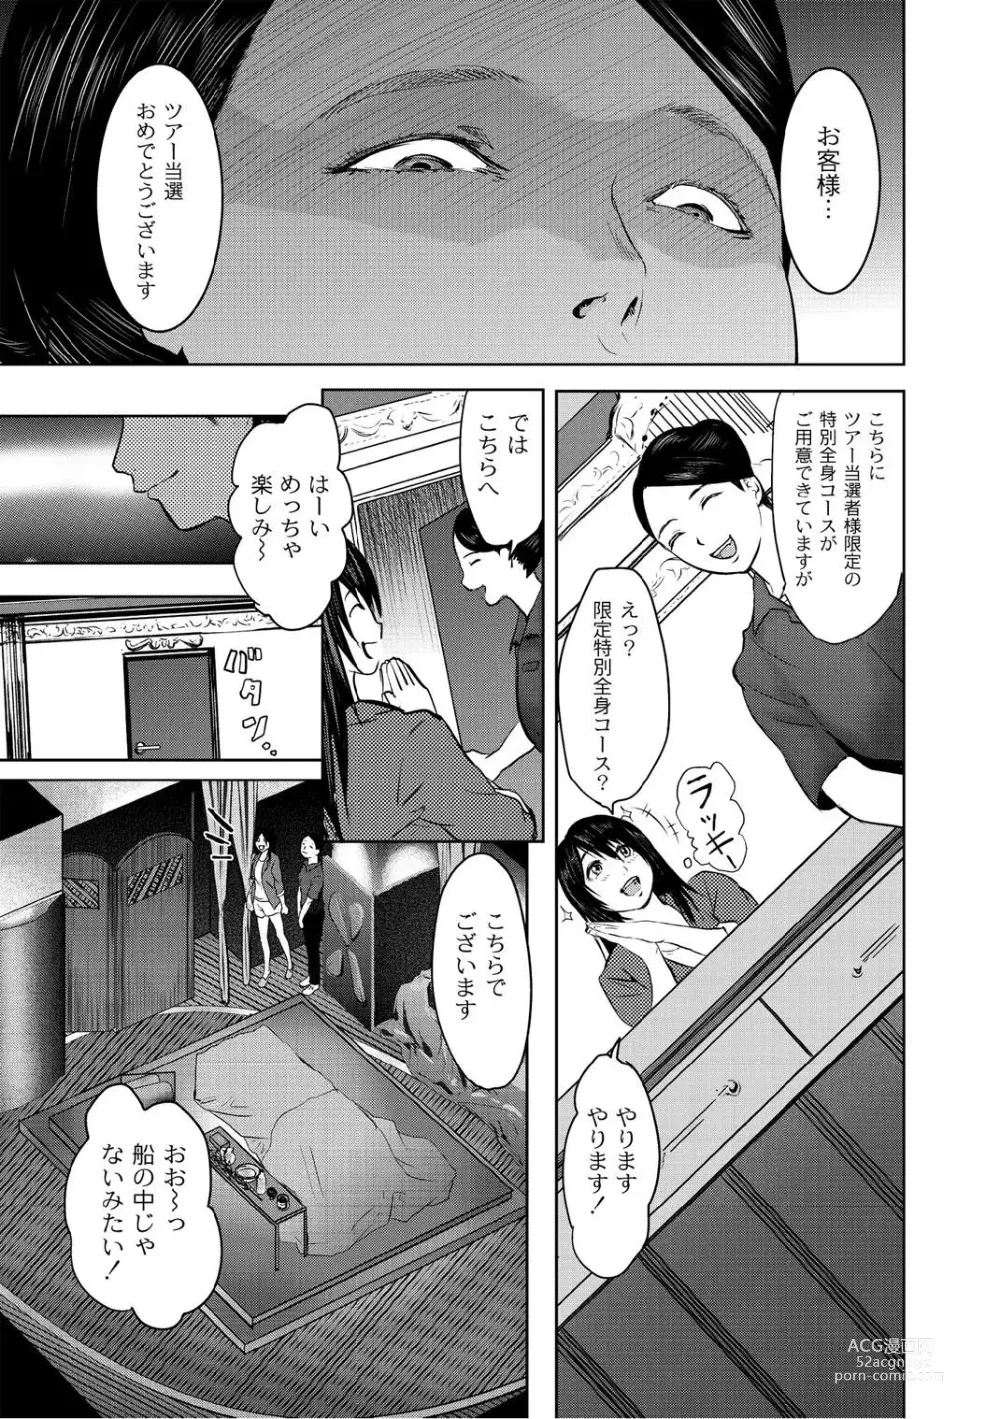 Page 6 of manga Monthly QooPA 2014-10